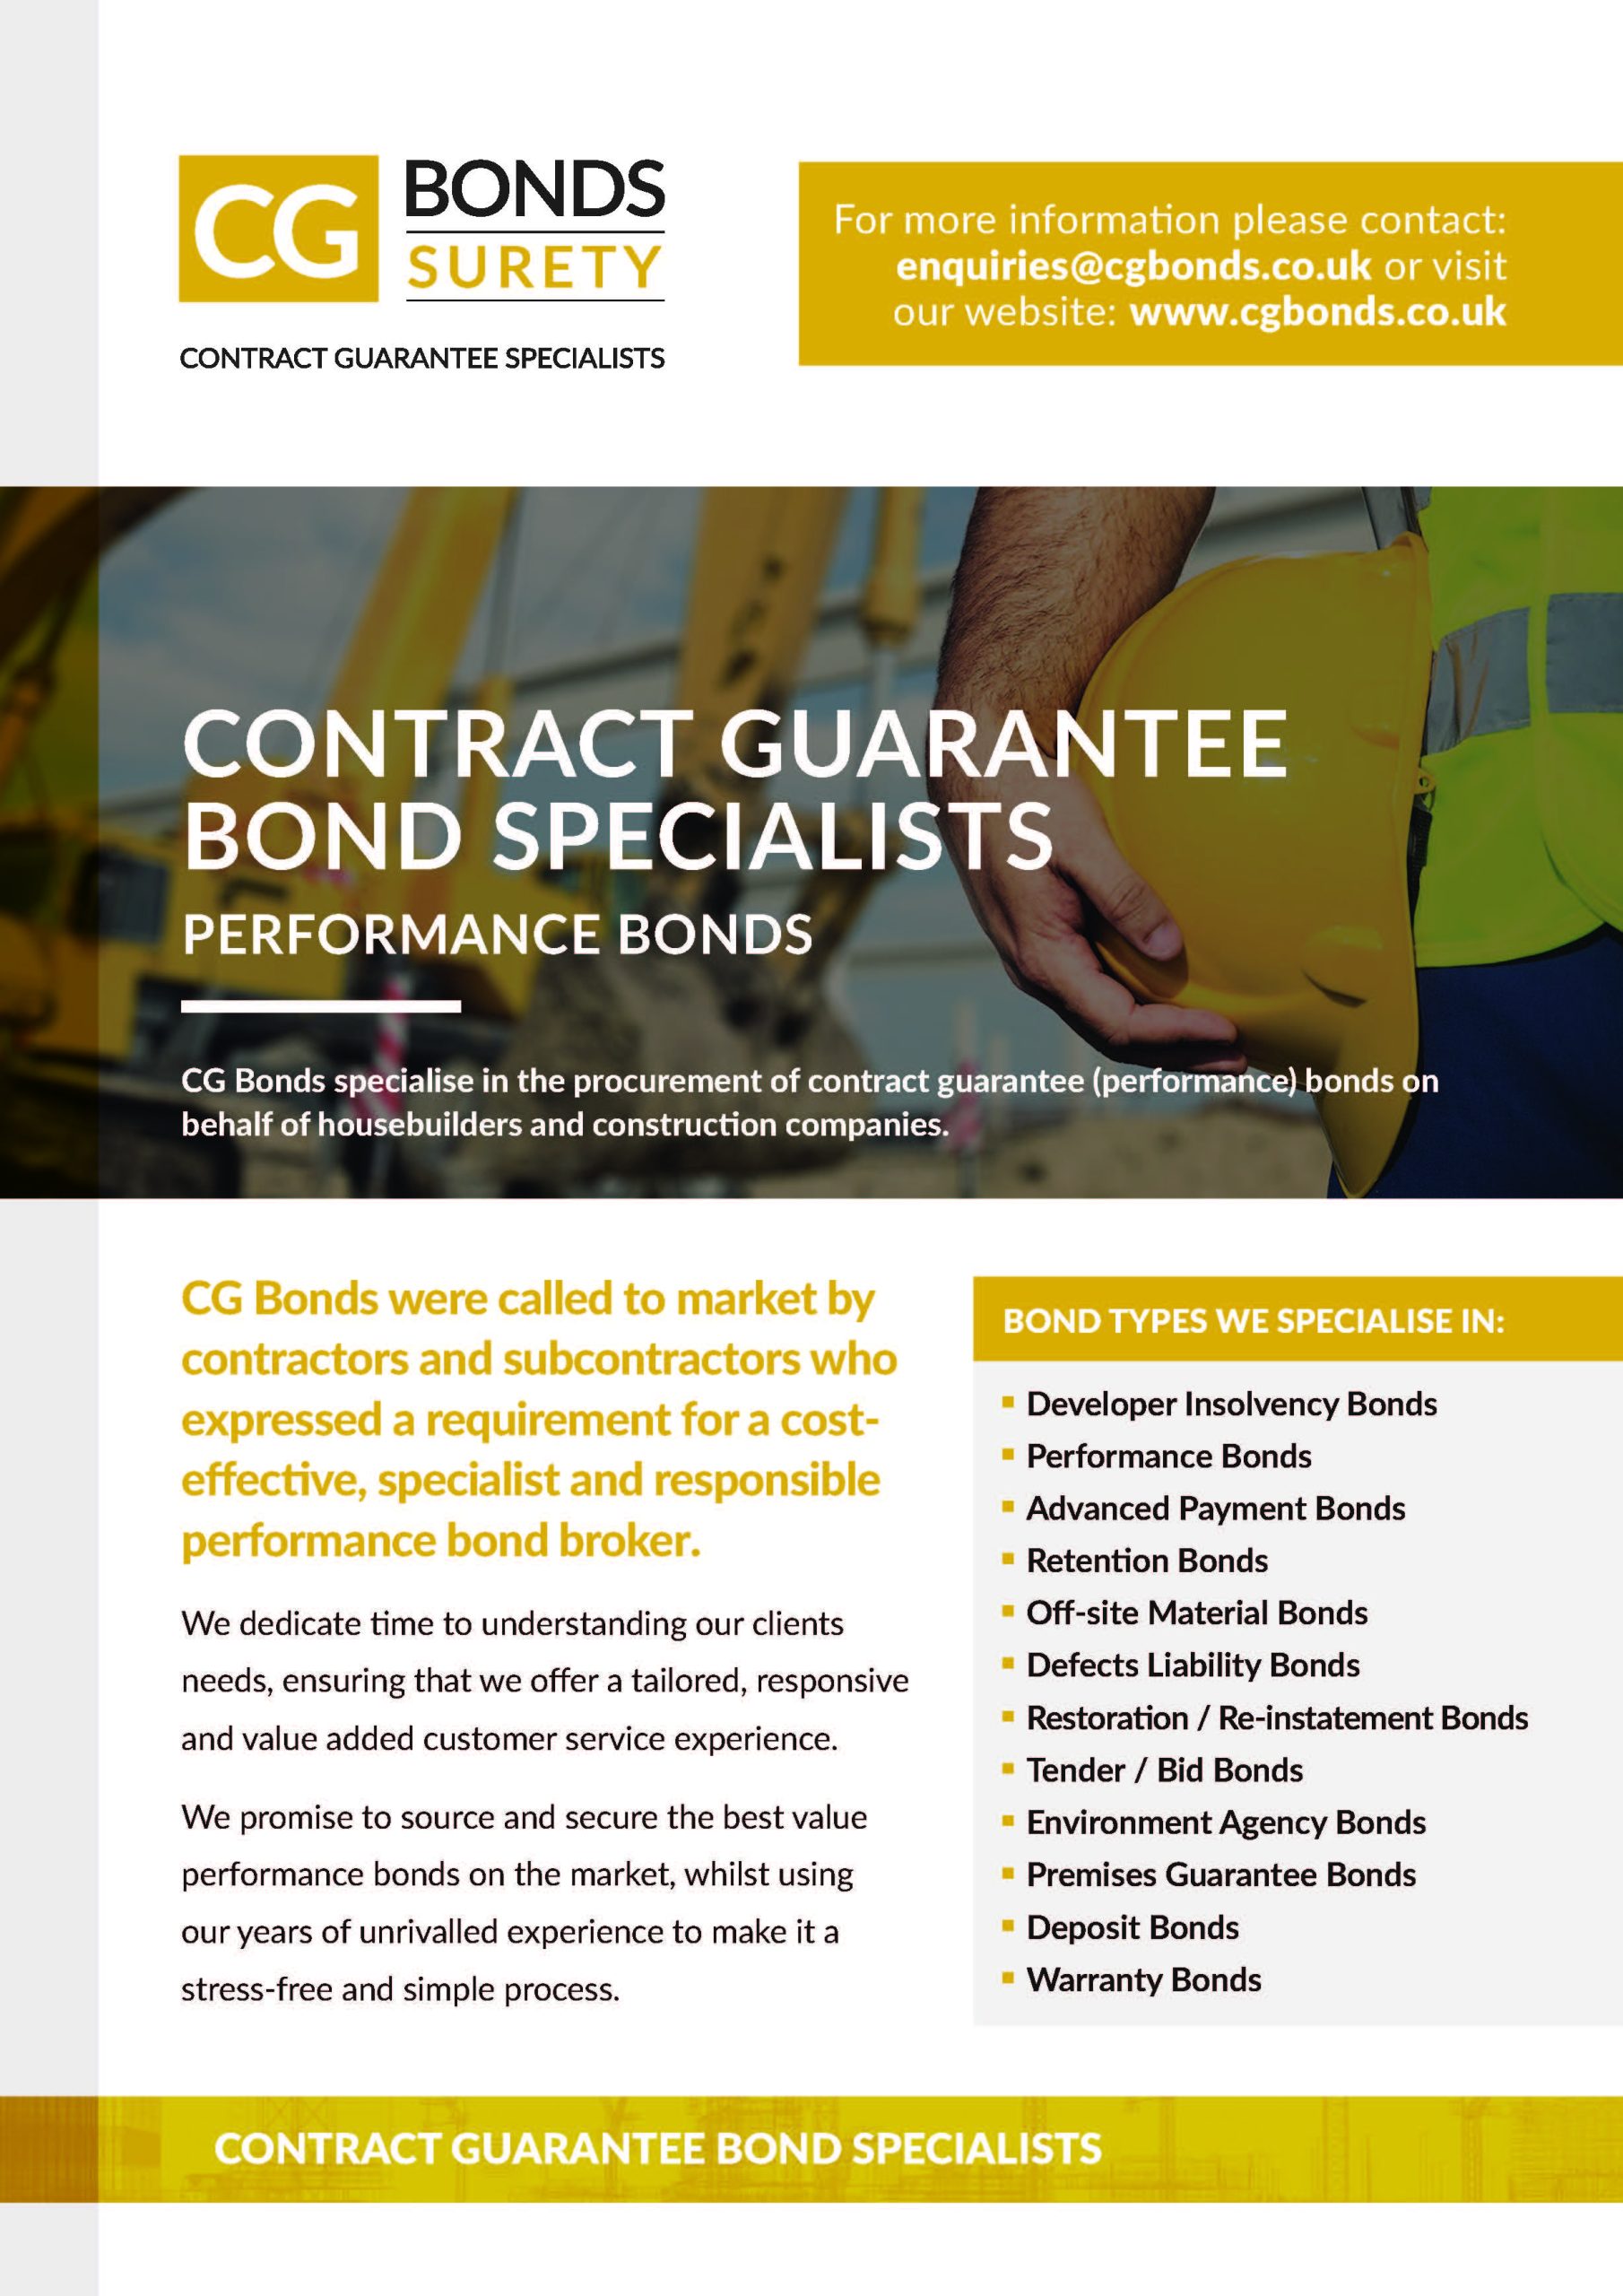 Bonds within the Construction Industry – Need any help understanding them and what they are for?